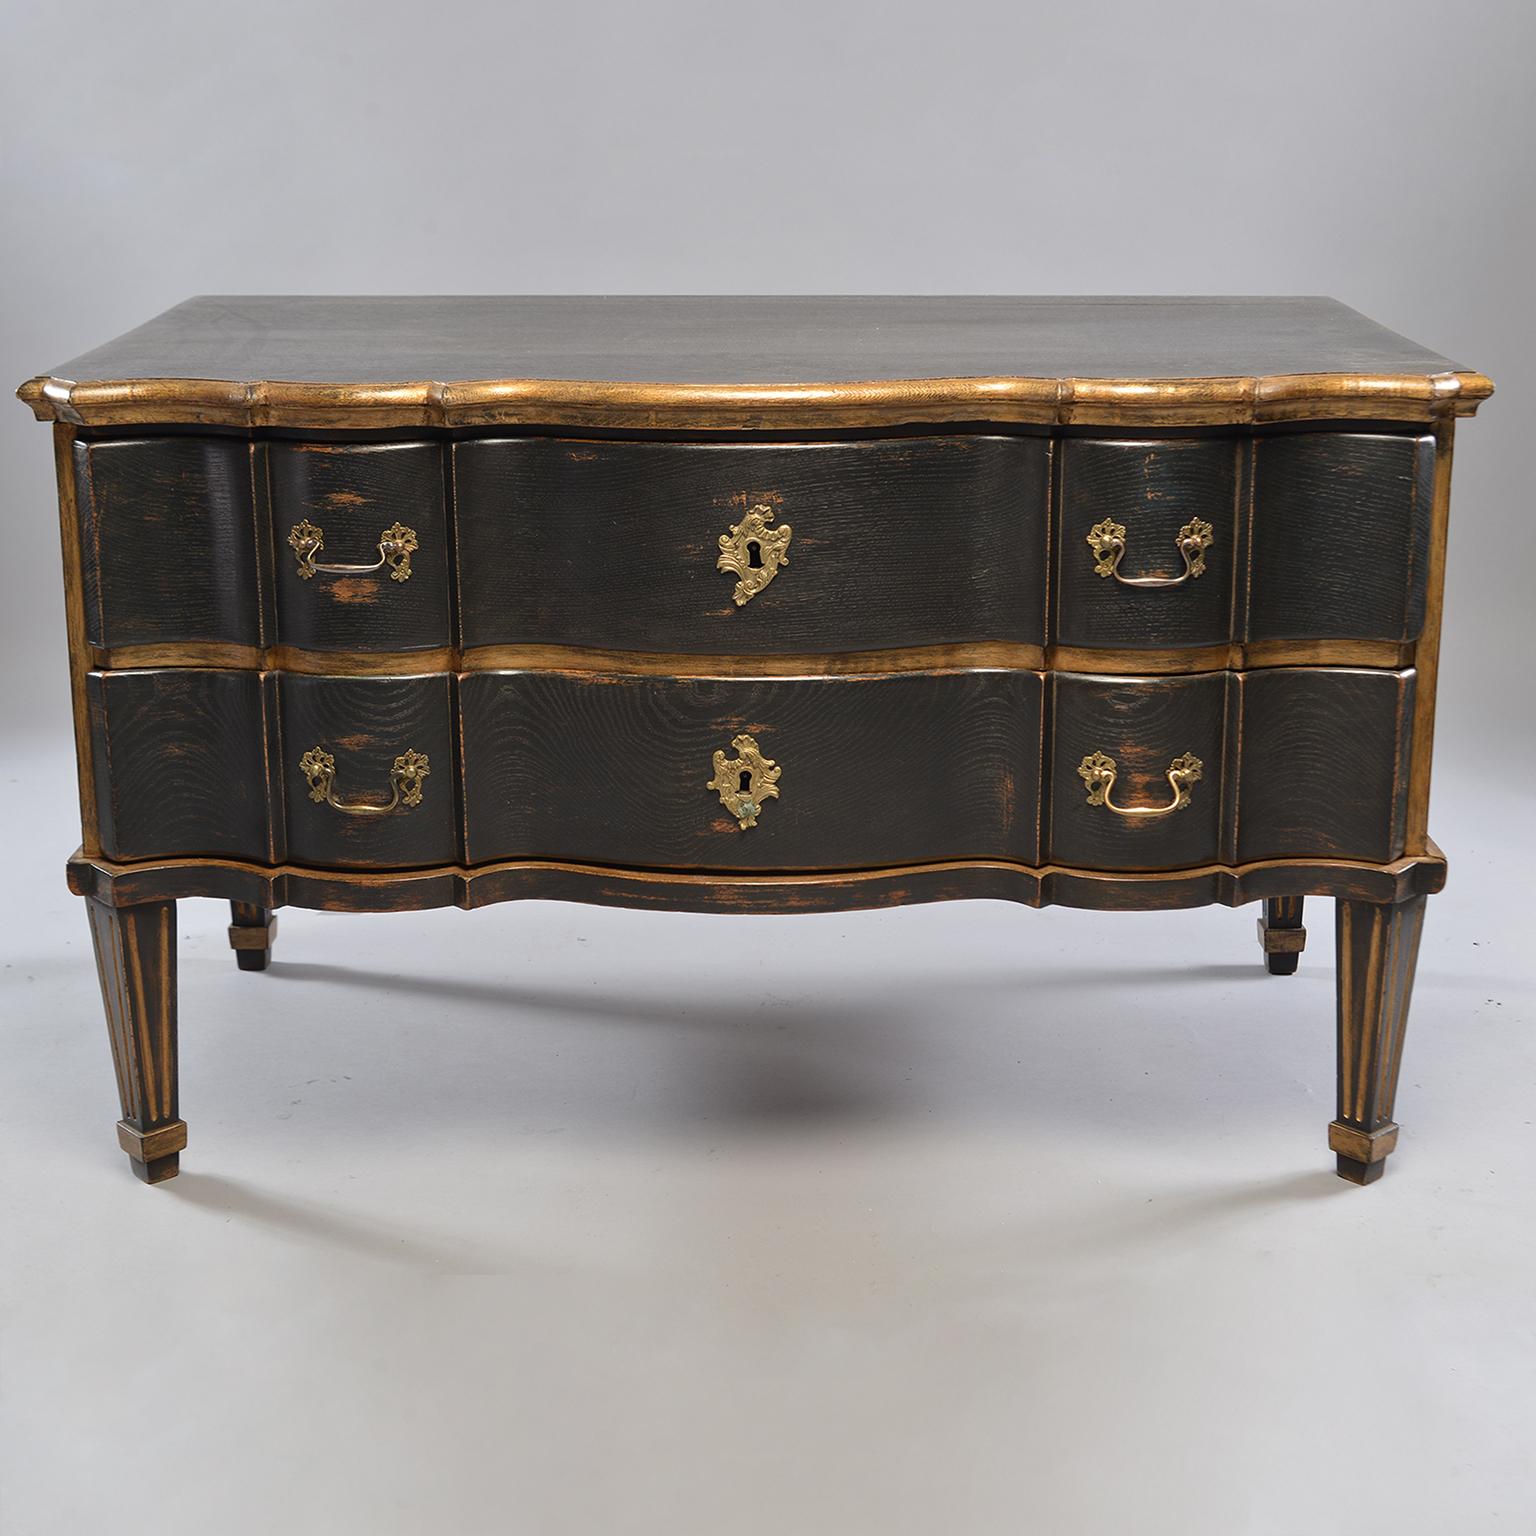 Pair of Danish oak chests feature two drawers each, serpentine fronts, reeded legs, brass hardware, black painted and gilded finish, circa 1880s. Unknown maker. Sold and priced as a pair.